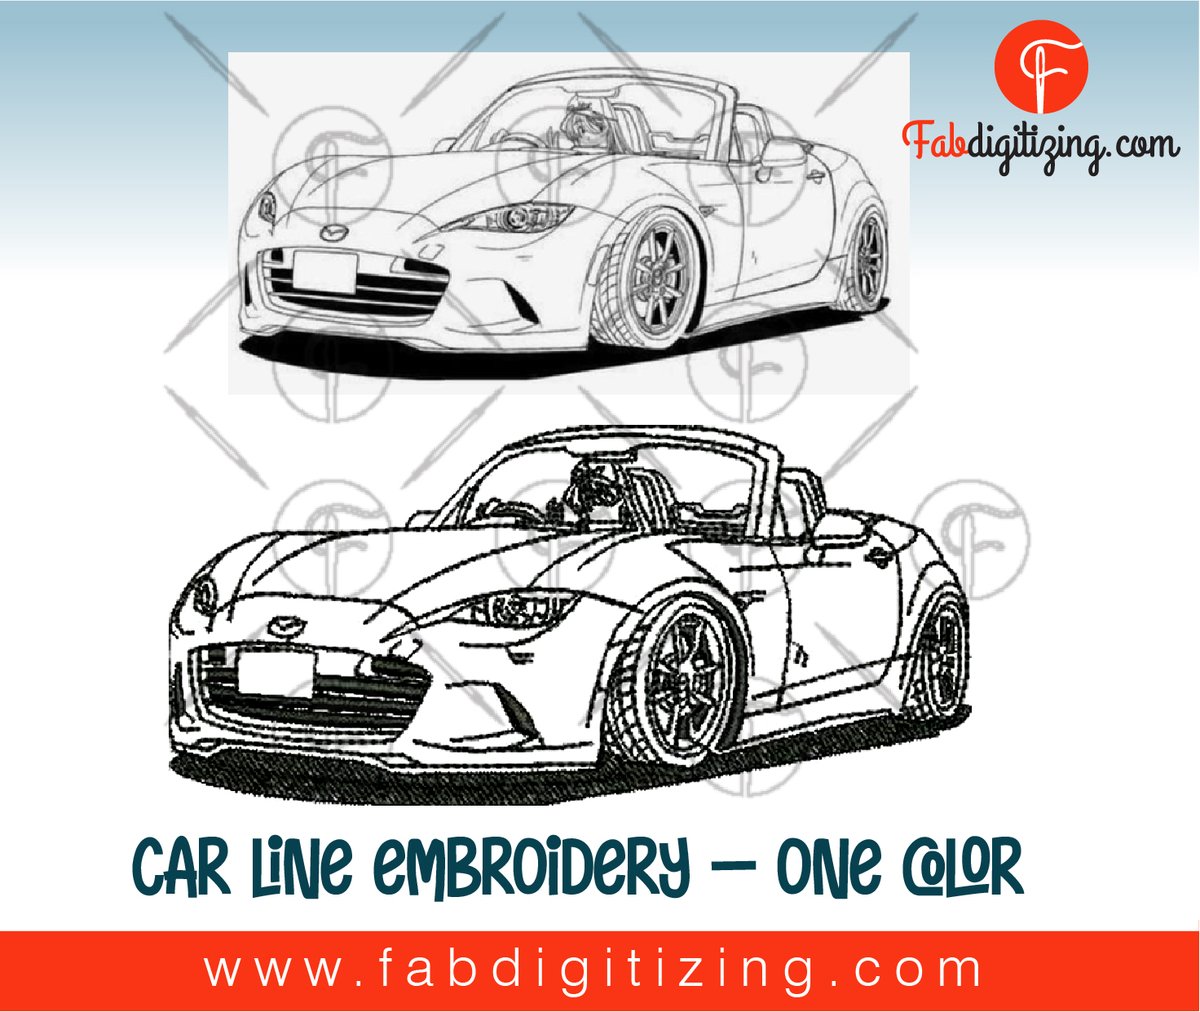 Car line embroidery - one color
#CustomEmbroidery #EmbroideryArt #StitchingLove #PersonalizedEmbroidery #ThreadMagic #EmbroideryDesigns #NeedleAndThread #HandmadeEmbroidery #CustomStitching
#EmbroideryHoops #CraftyHands #EmbroideryAddict #UniqueStitches #ThreadCraft